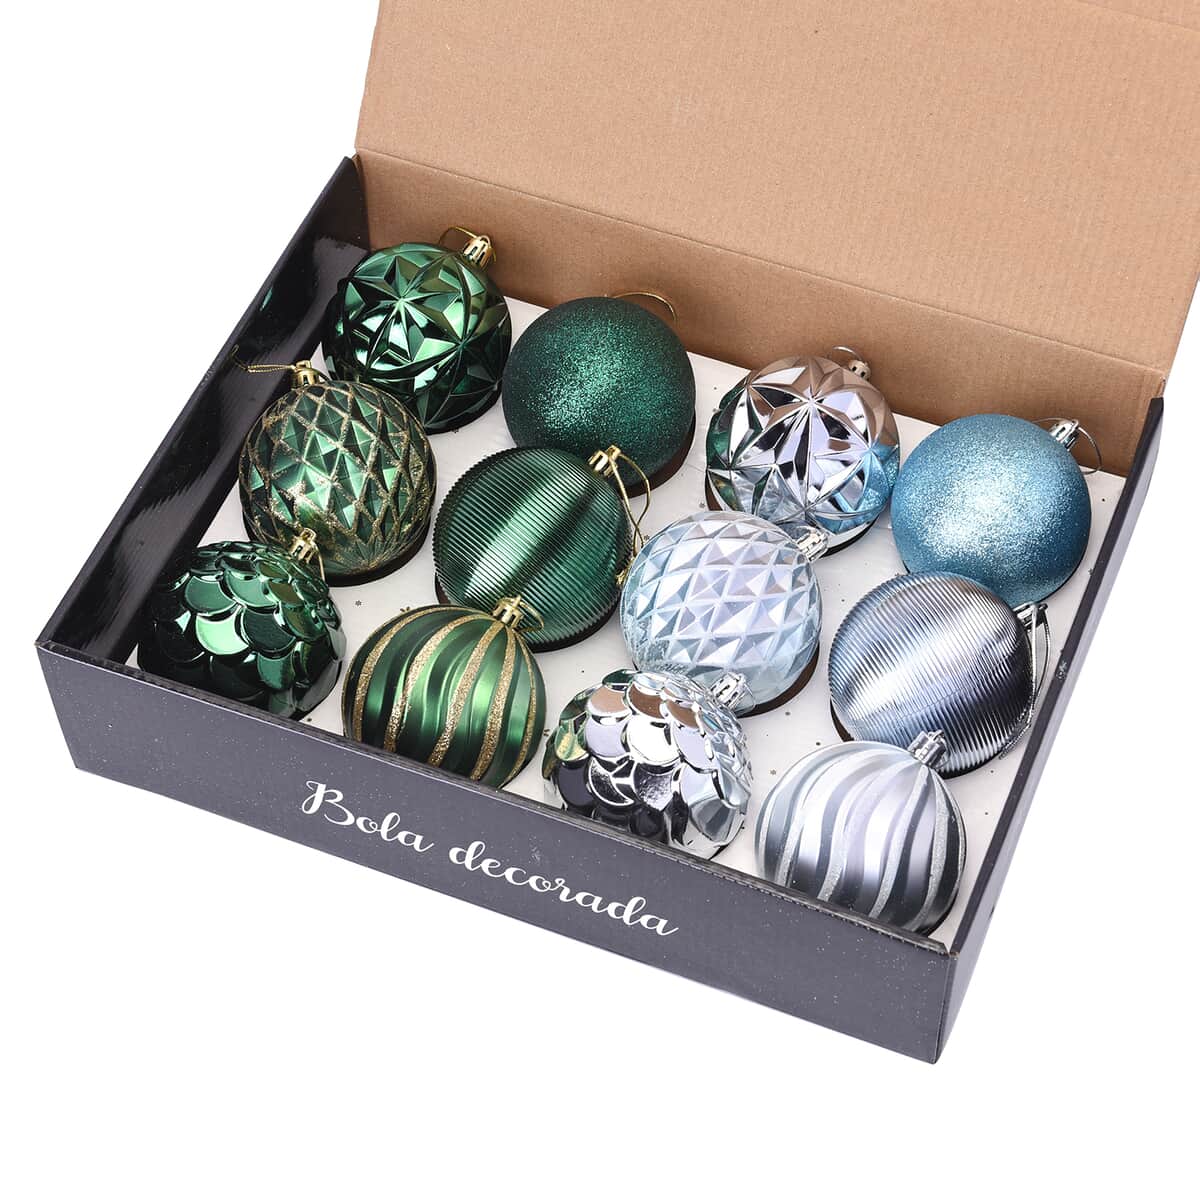 12 Pieces of Christmas Tree Decoration Balls in Gift Box - Green image number 1